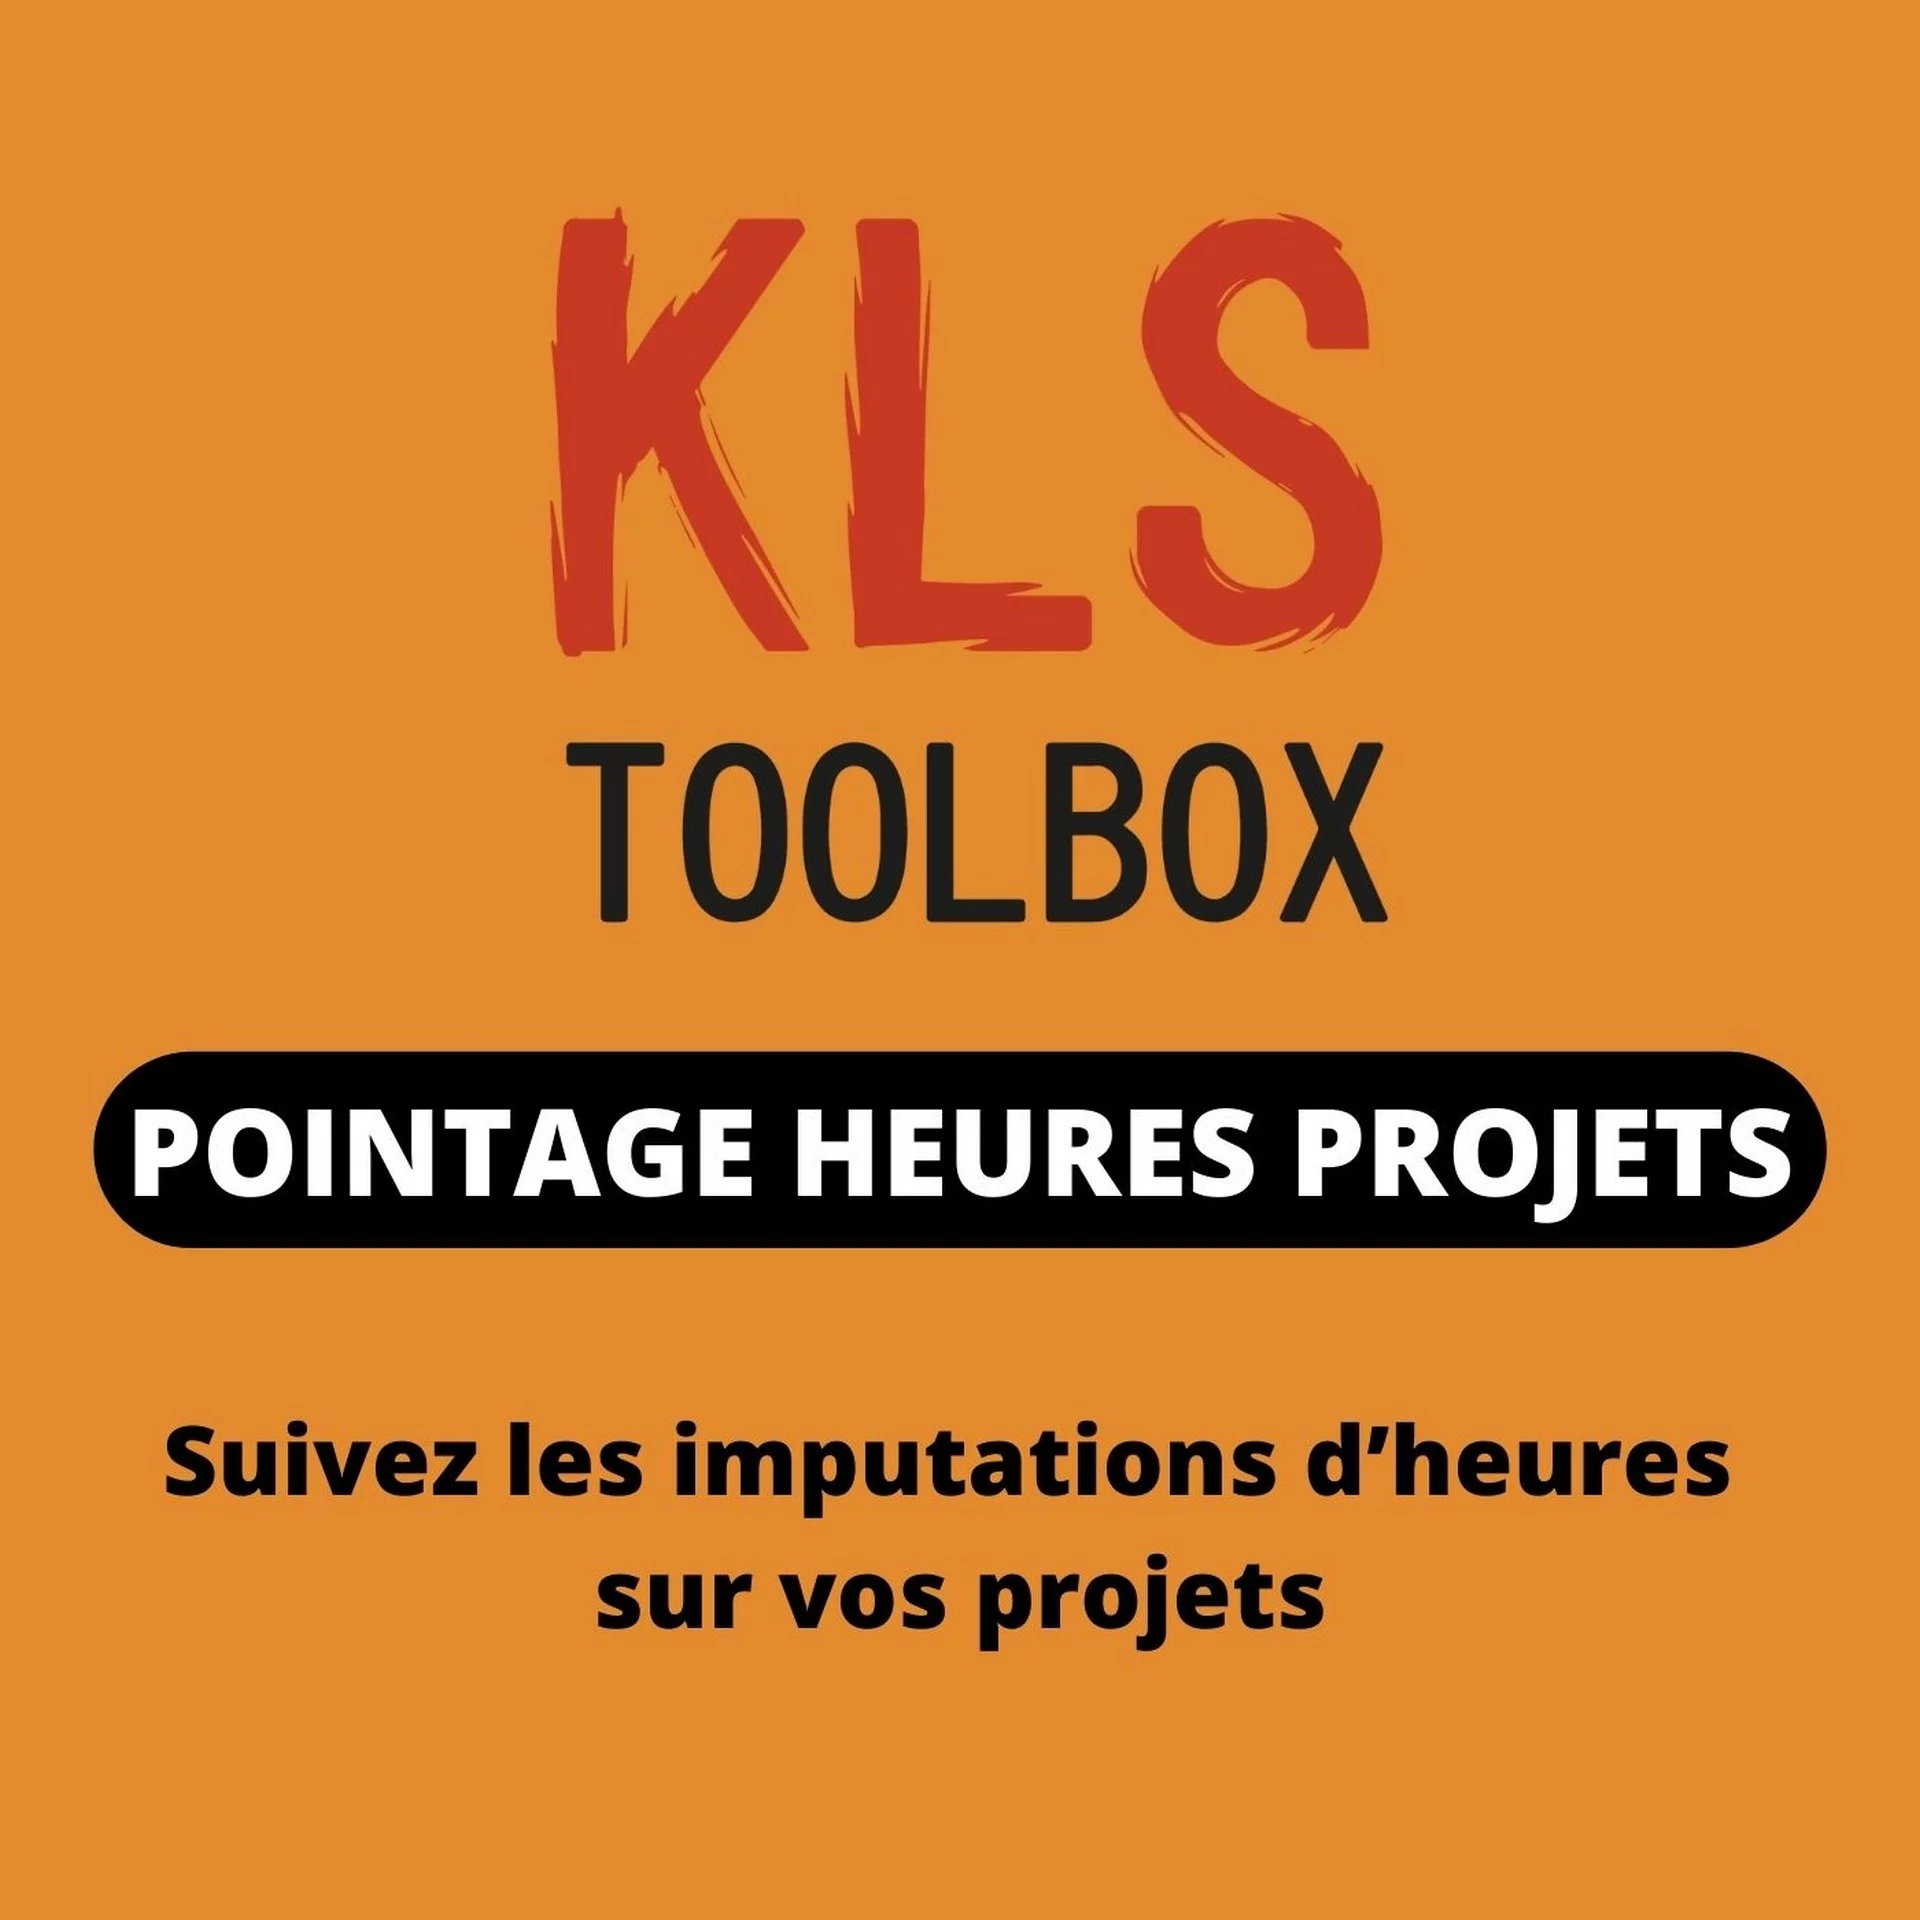 xtep kls toolbox monitoring hours project